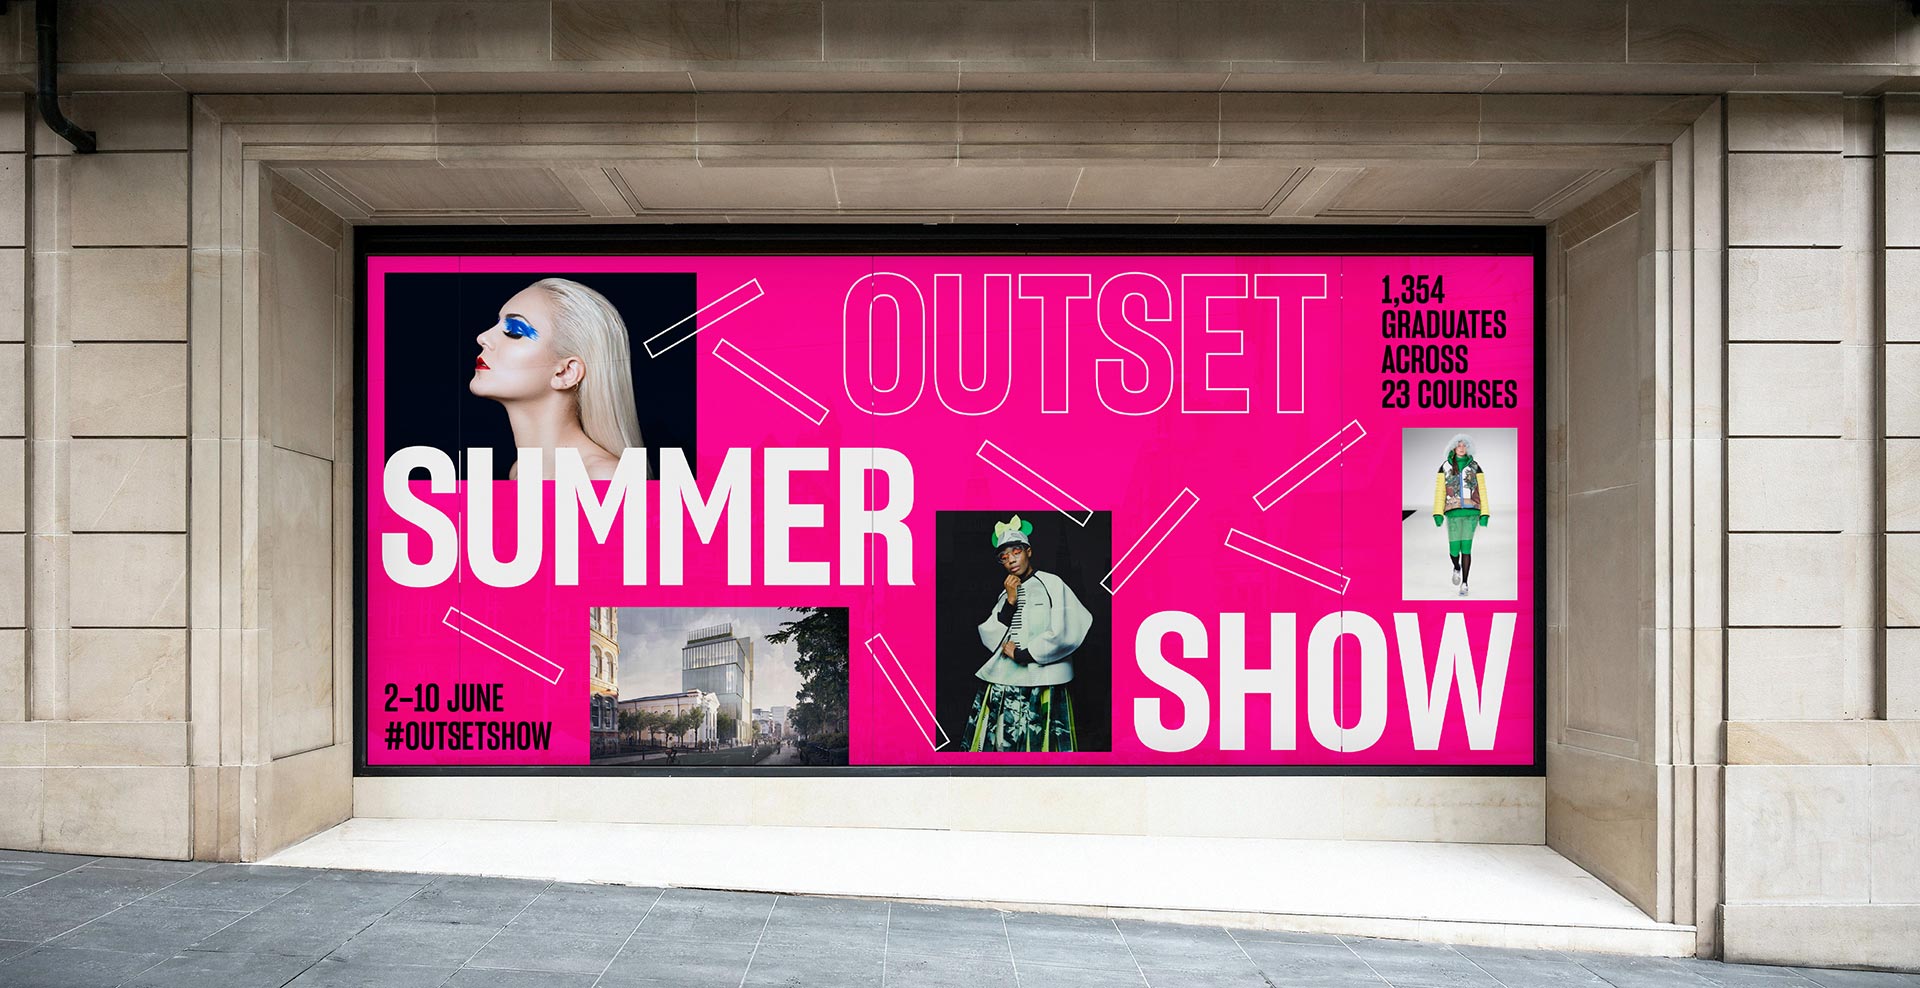 univerity degree show design, featuring an on campus window banner